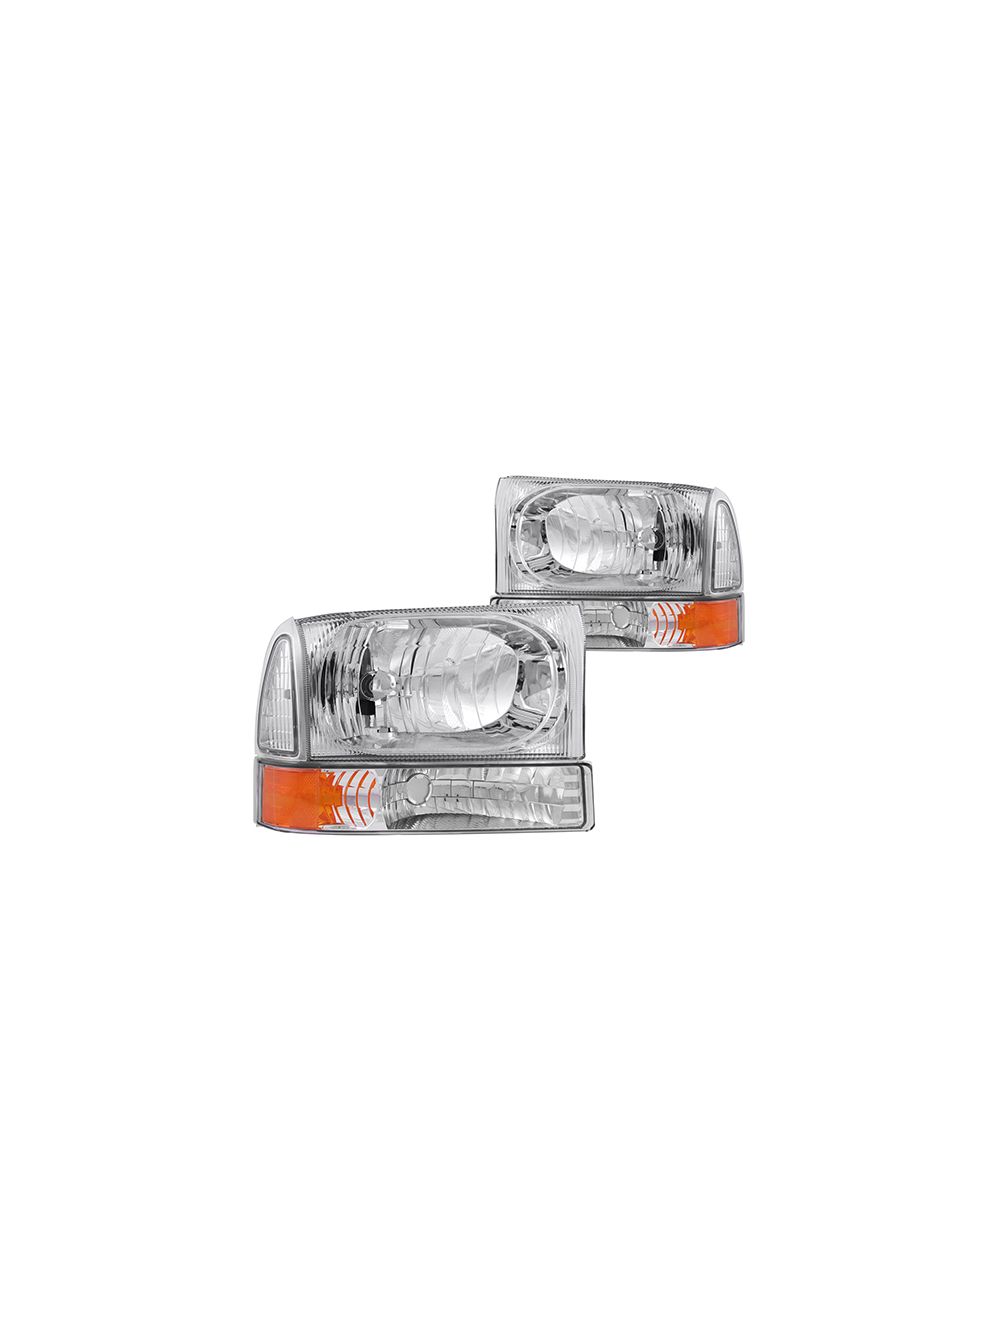 Anzo ANZ111081 Chrome with Amber Corner Headlights for Ford 1999 - 2004 Super Duty & 2000 - 2004 Excursion